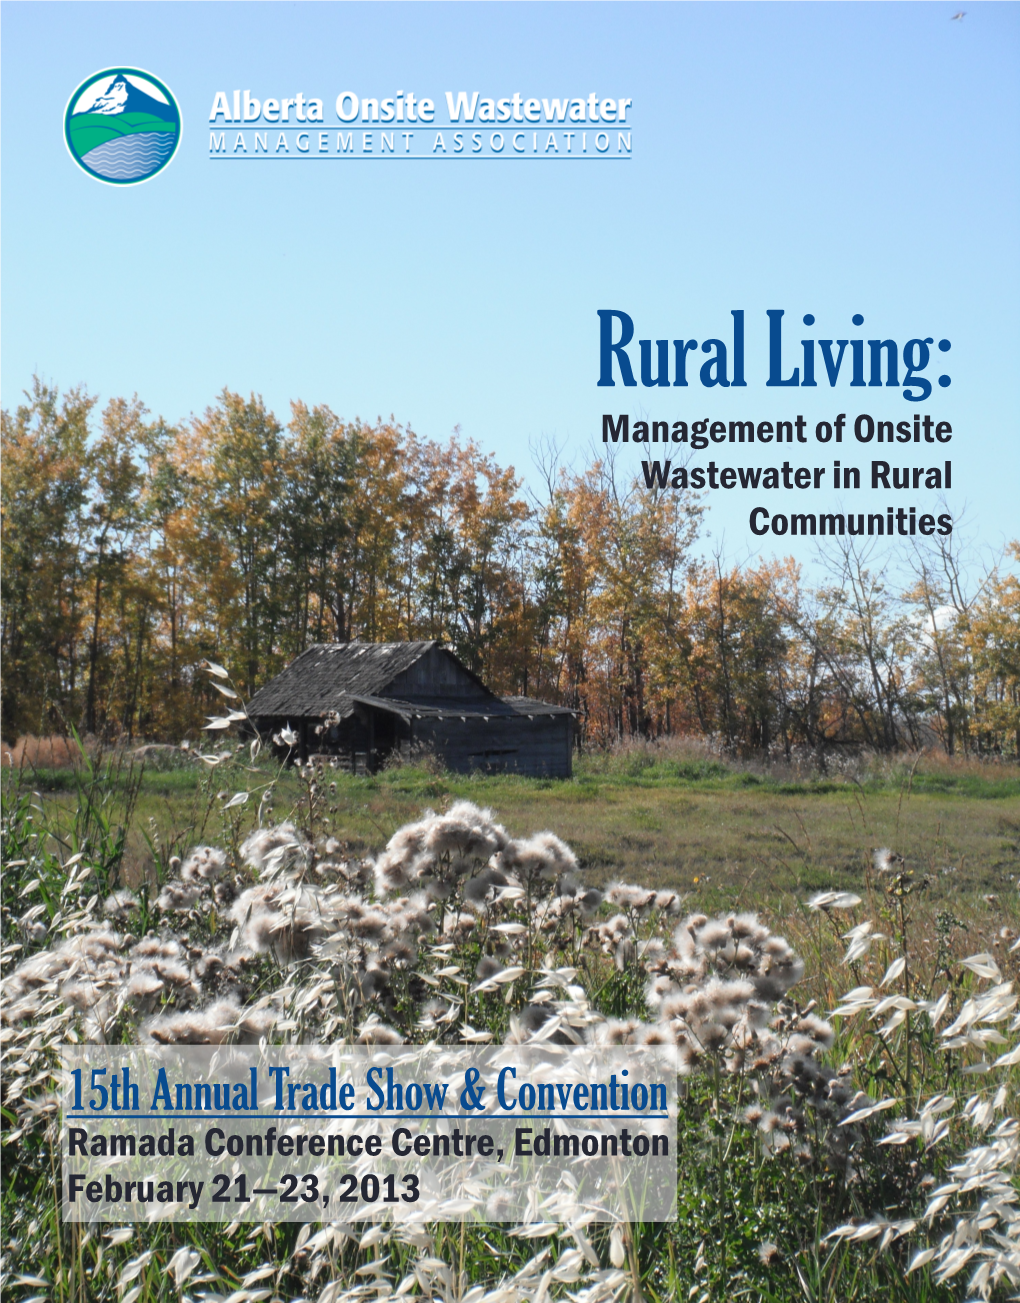 Rural Living: Management of Onsite Wastewater in Rural Communities